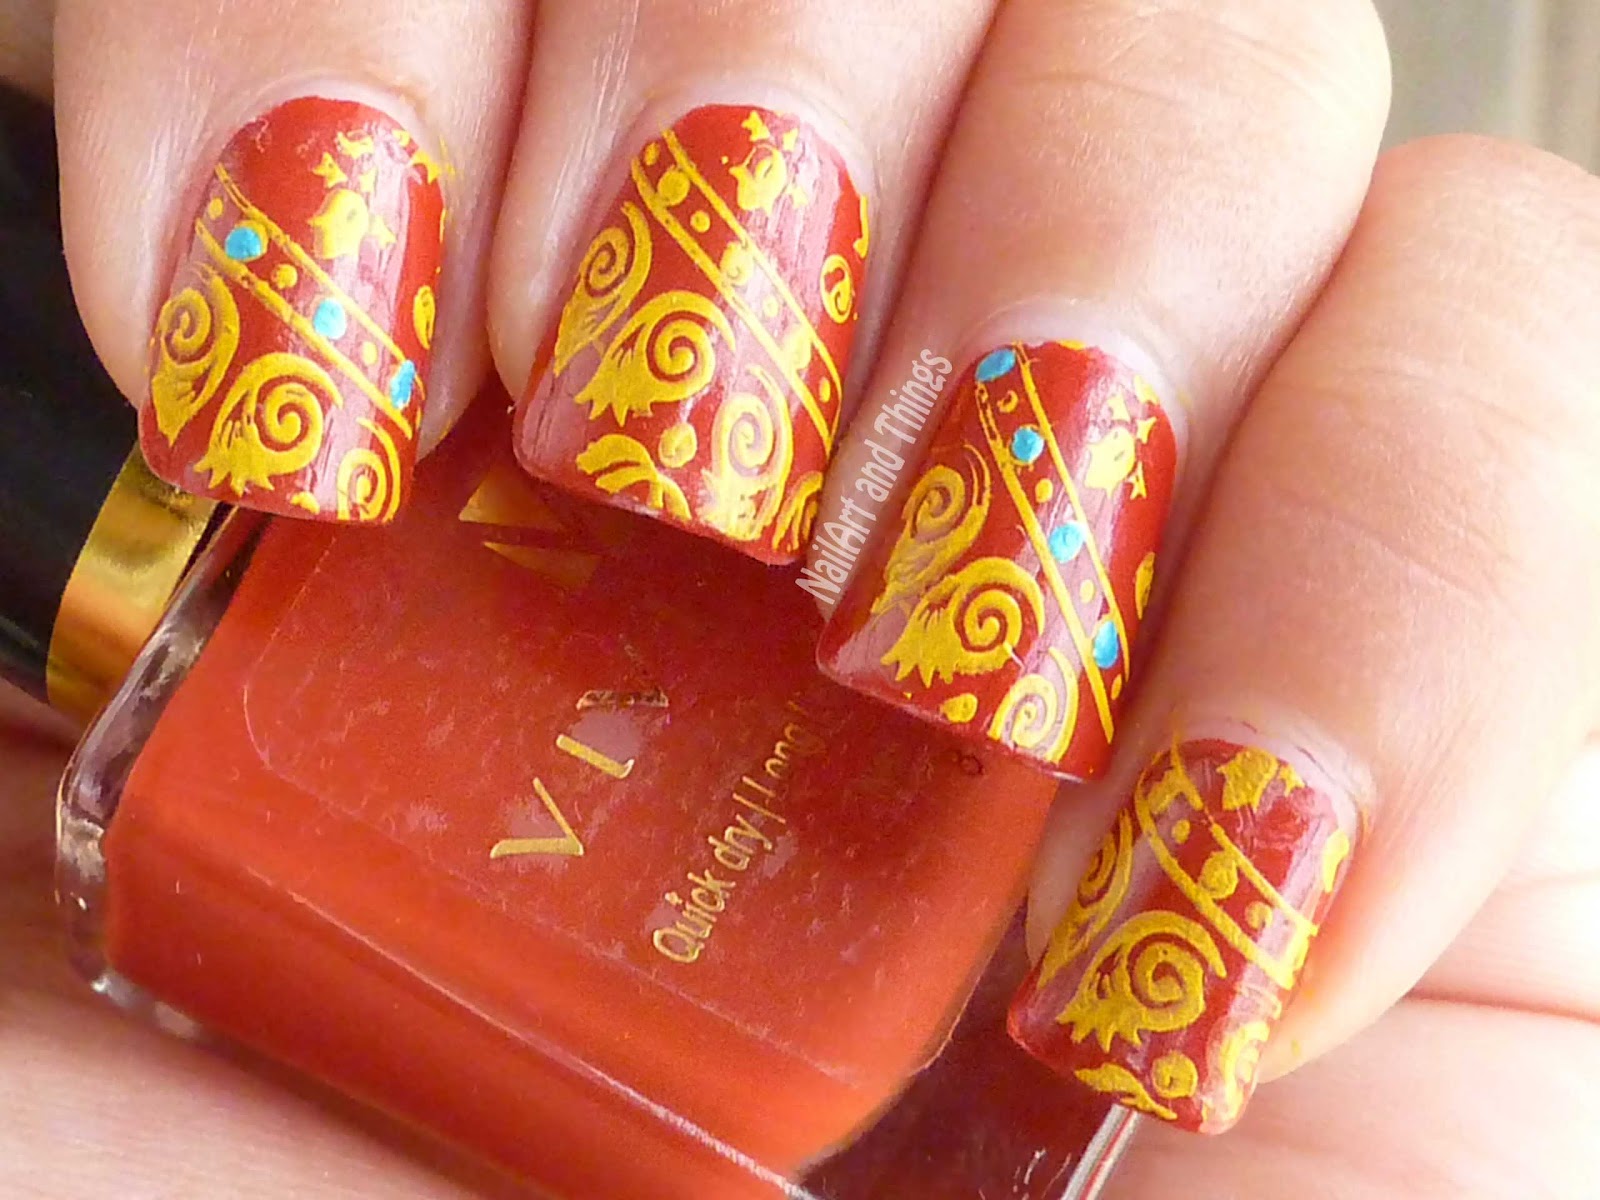 2. African Inspired Nail Art - wide 2